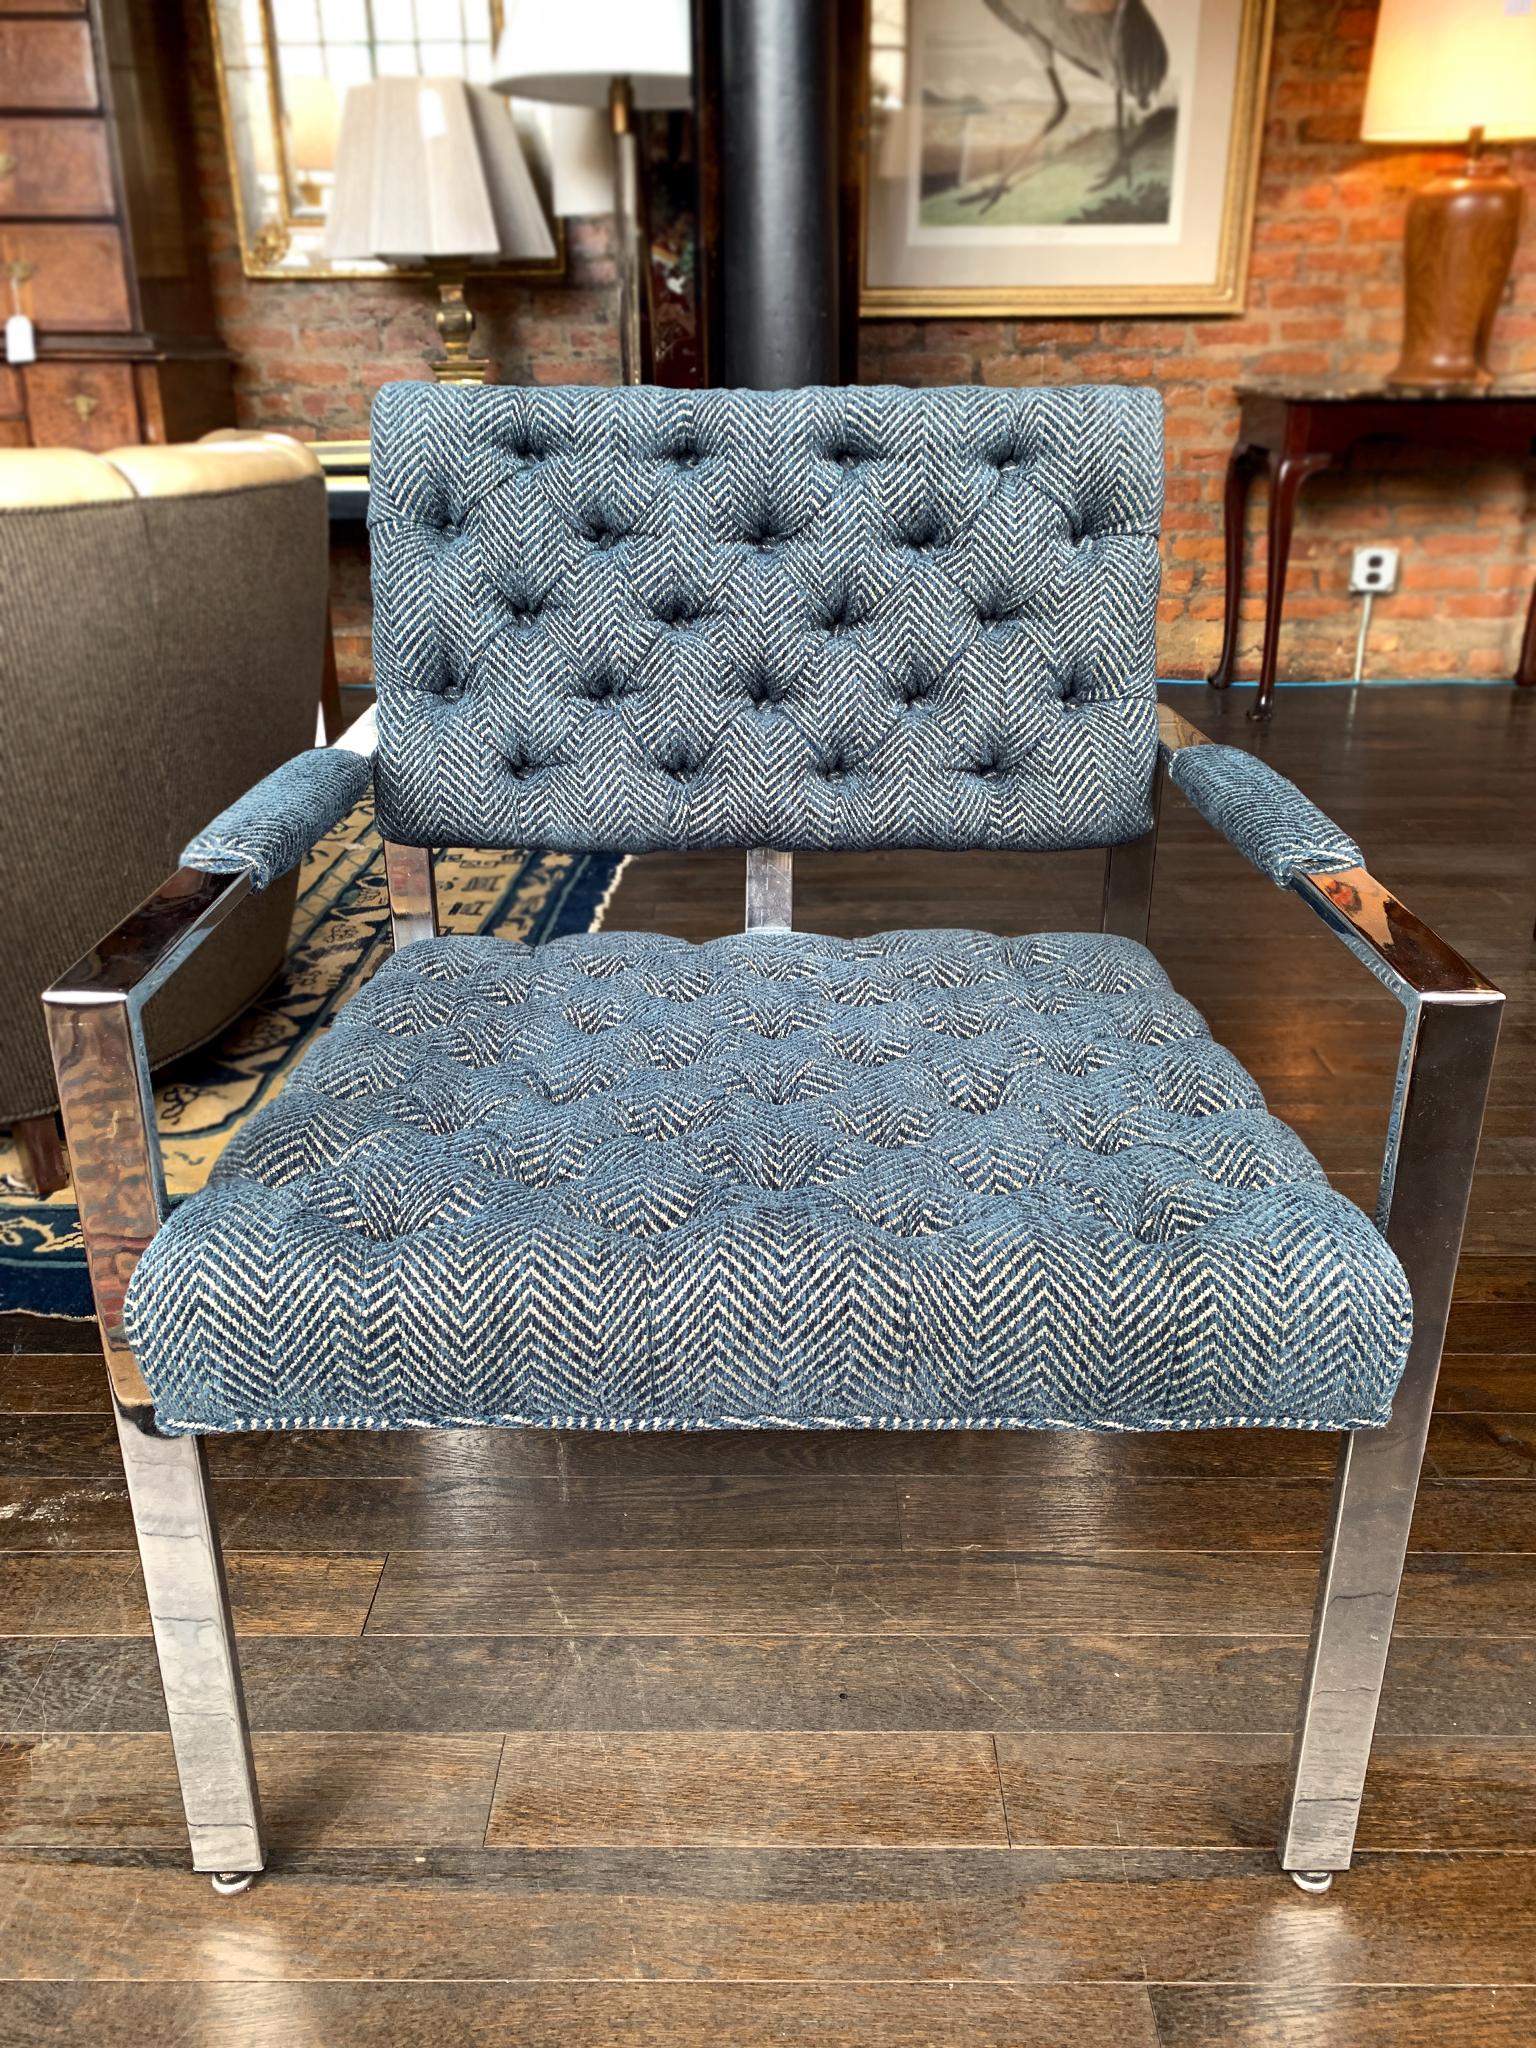 Pair of Milo Baughman lounge chairs made in the 1970s, with chrome frame. They are newly reupholstered with a high-performance, blue-and-white chevron fabric from Kravet. Other remarkable design details include the button tufting in the backrest and